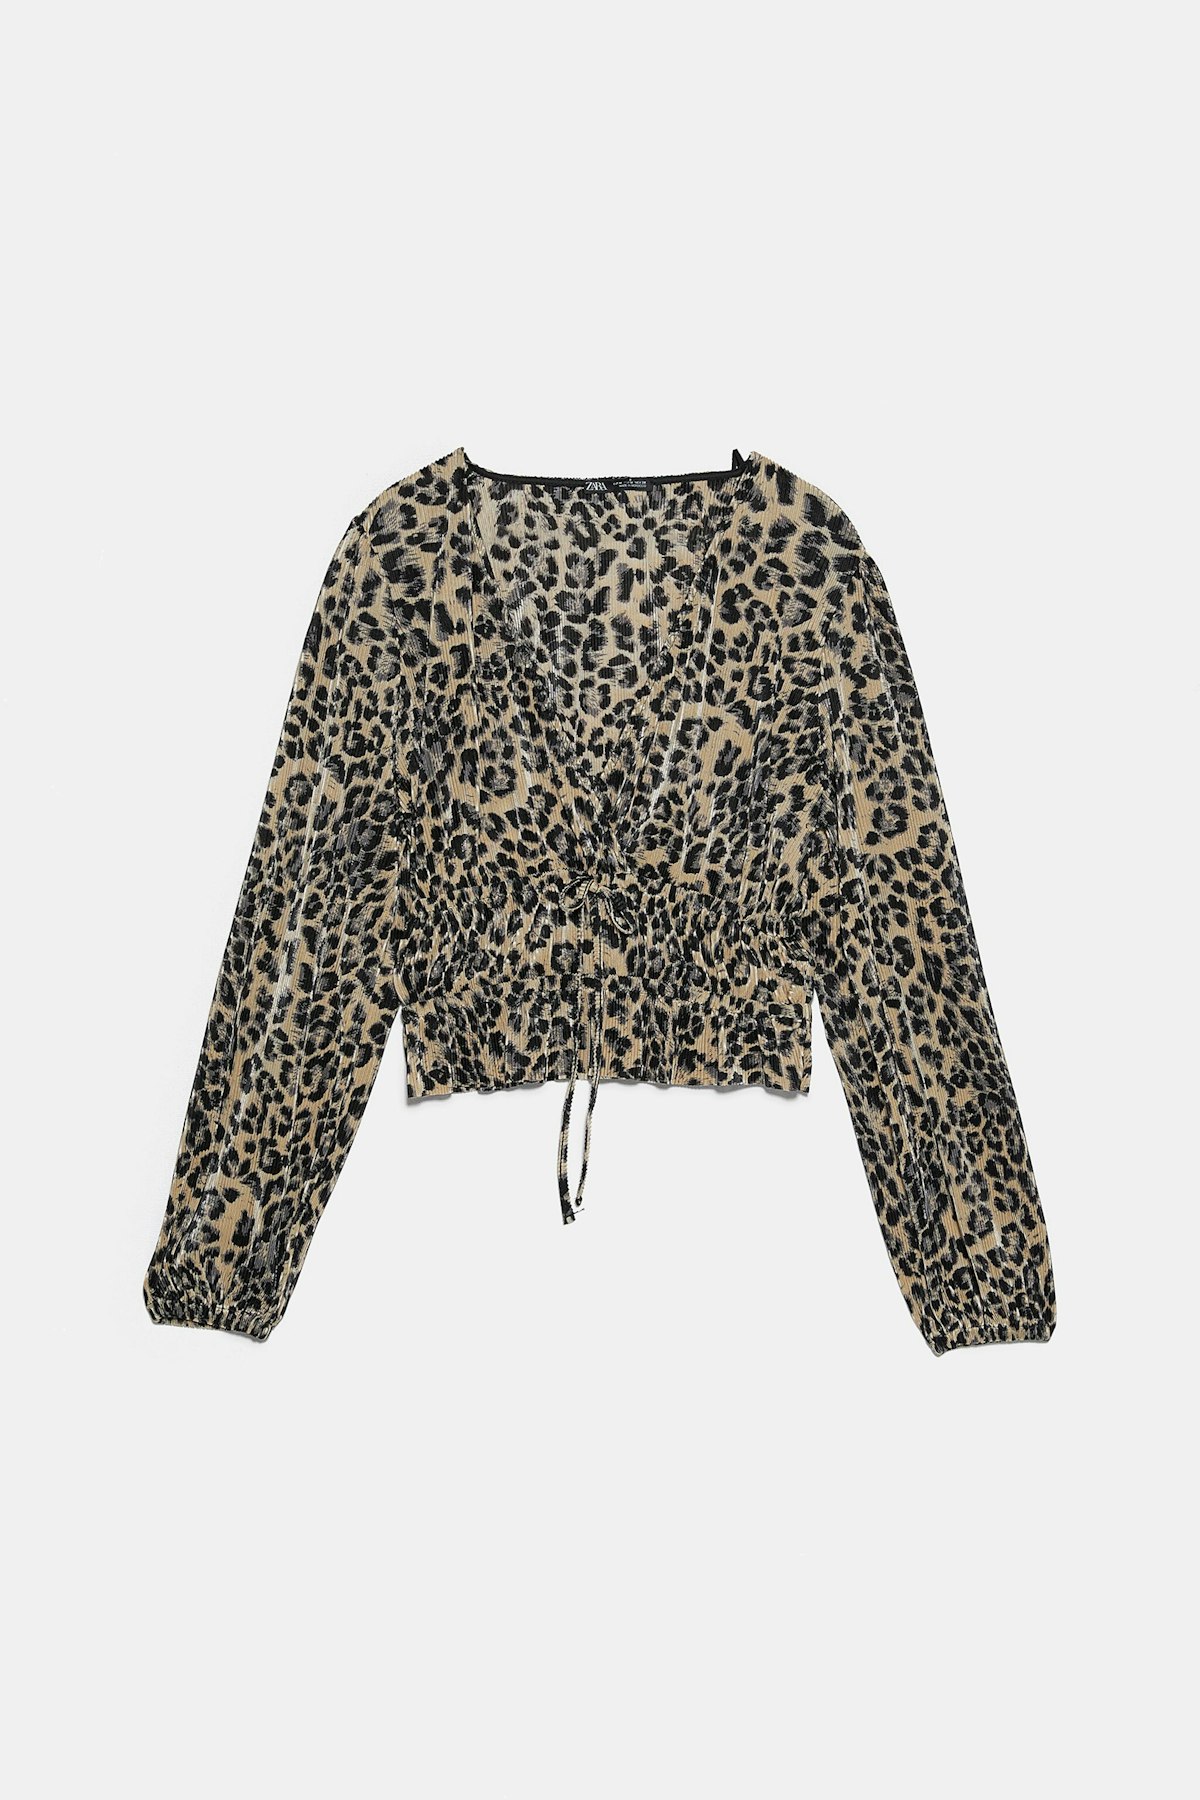 We've Fallen Back In Love With Animal Print Thanks To Tiger King ...